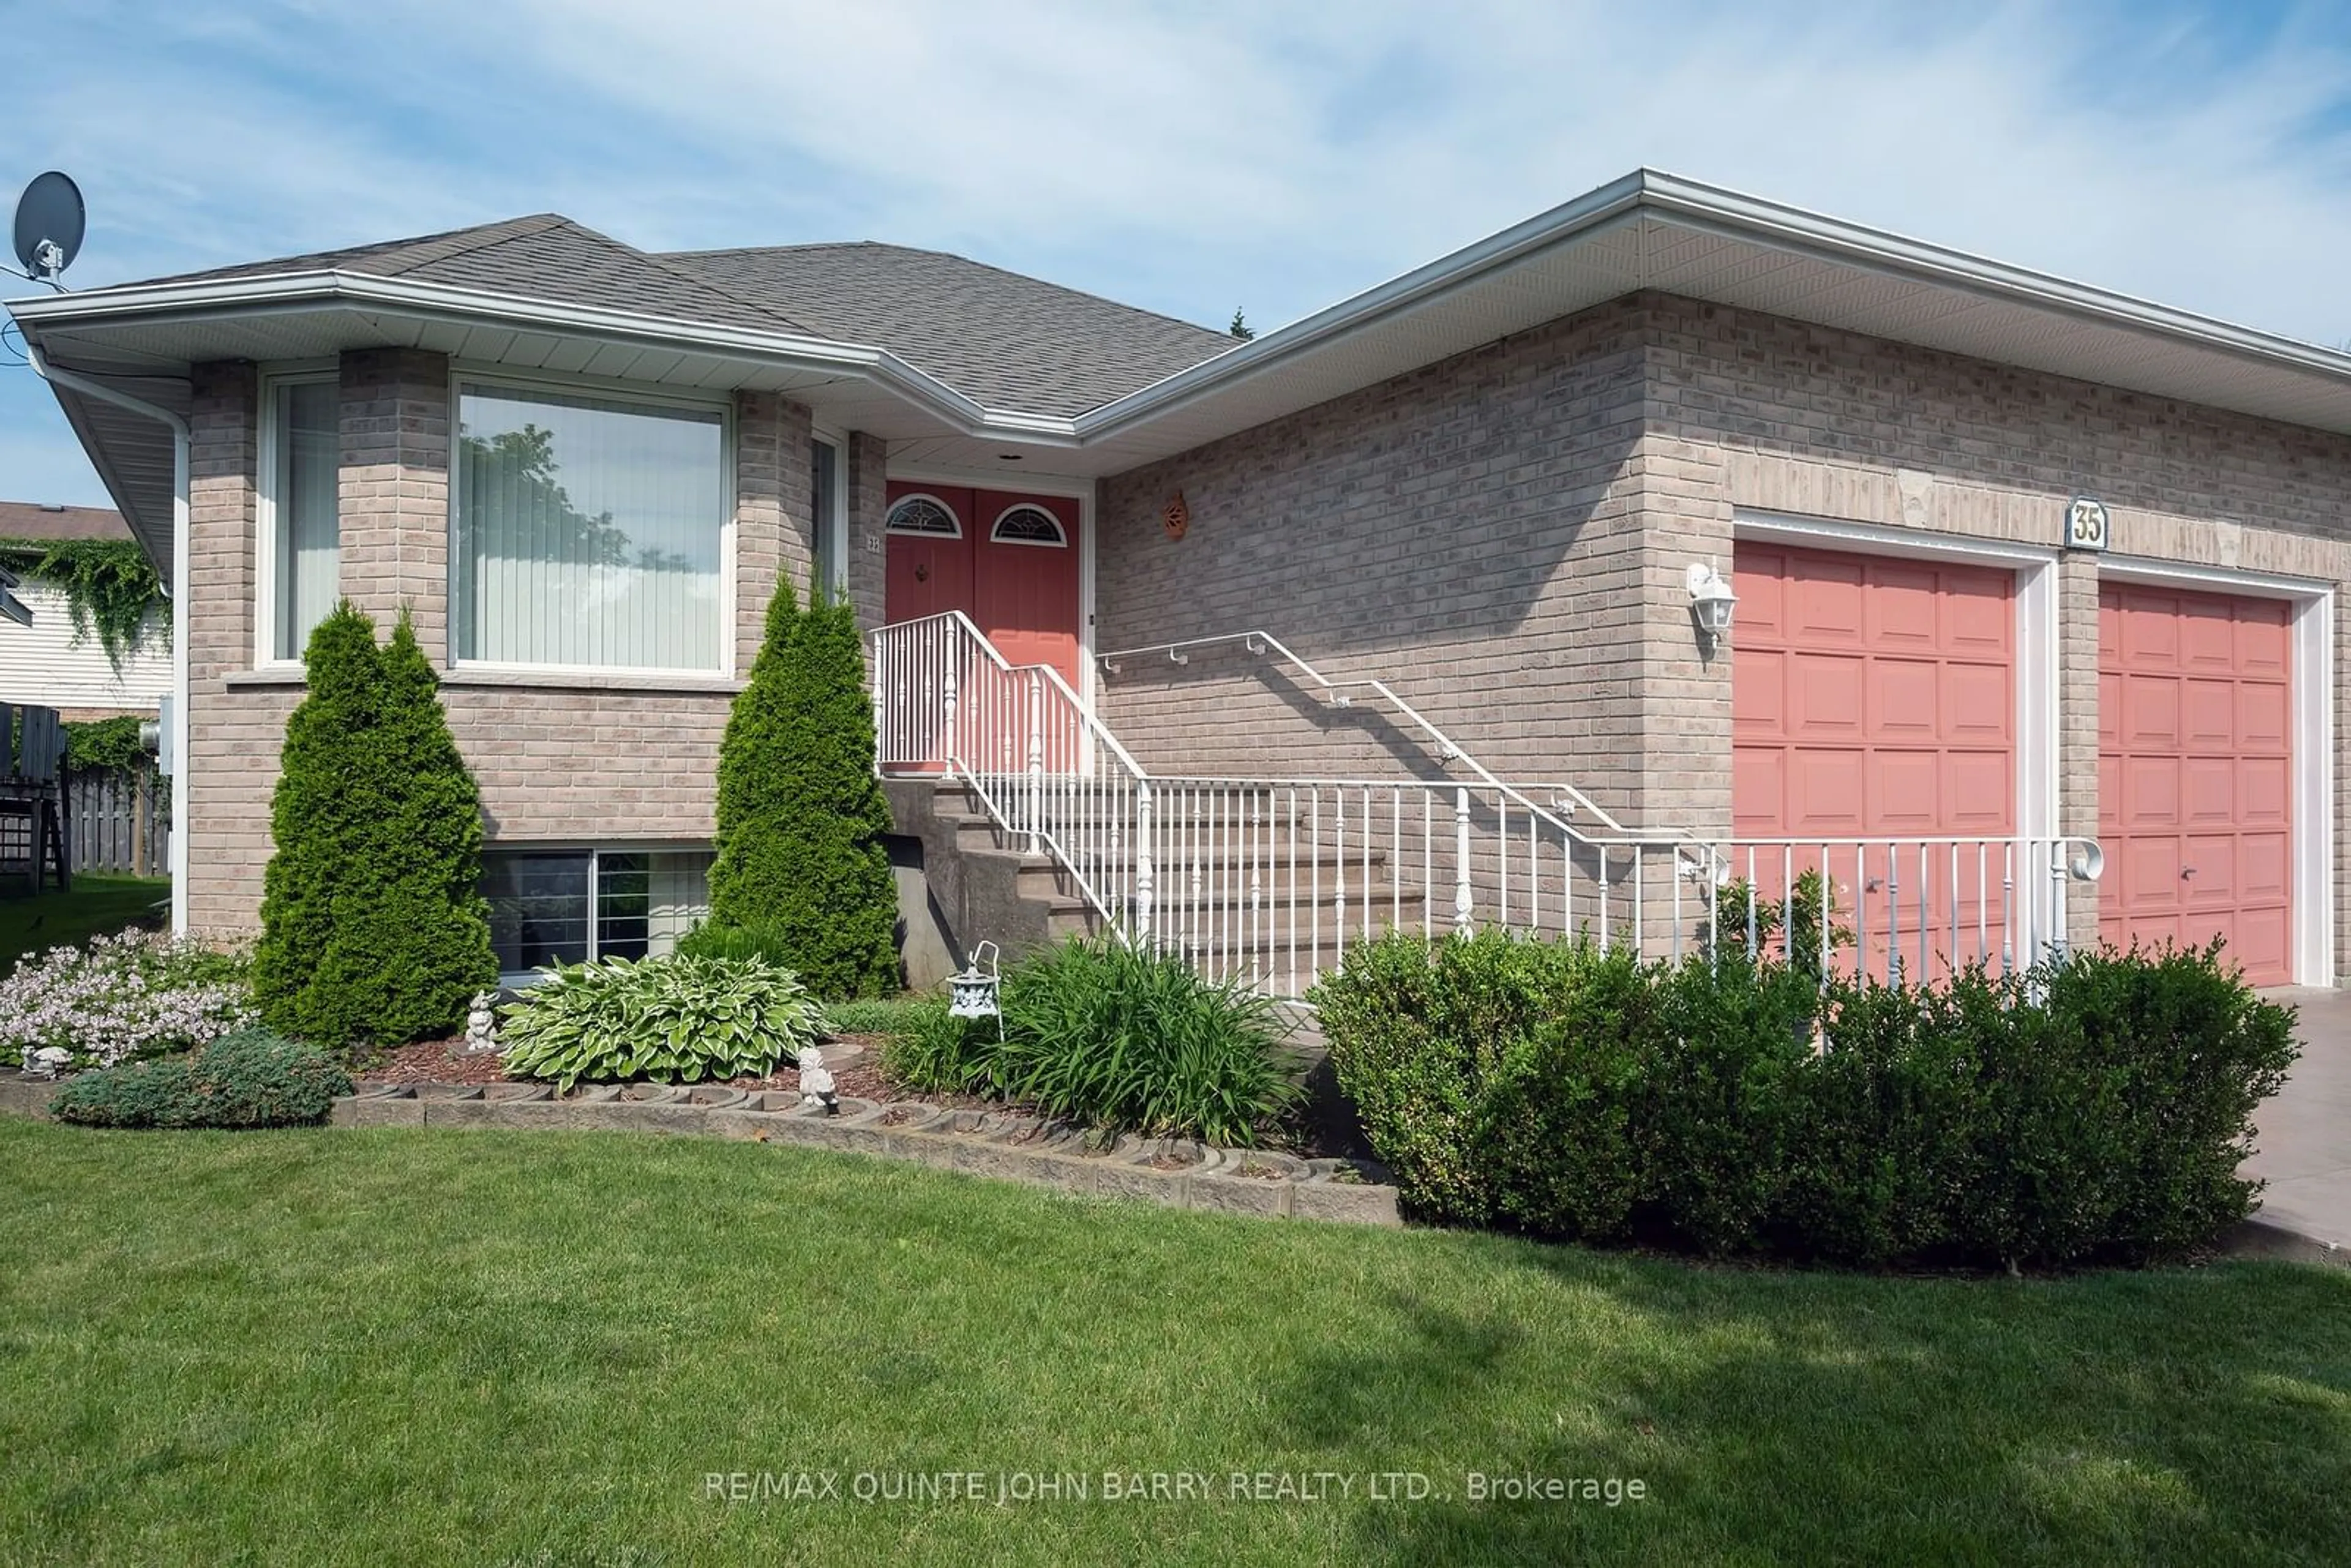 Home with brick exterior material for 35 Forchuk Cres, Quinte West Ontario K8V 6N2